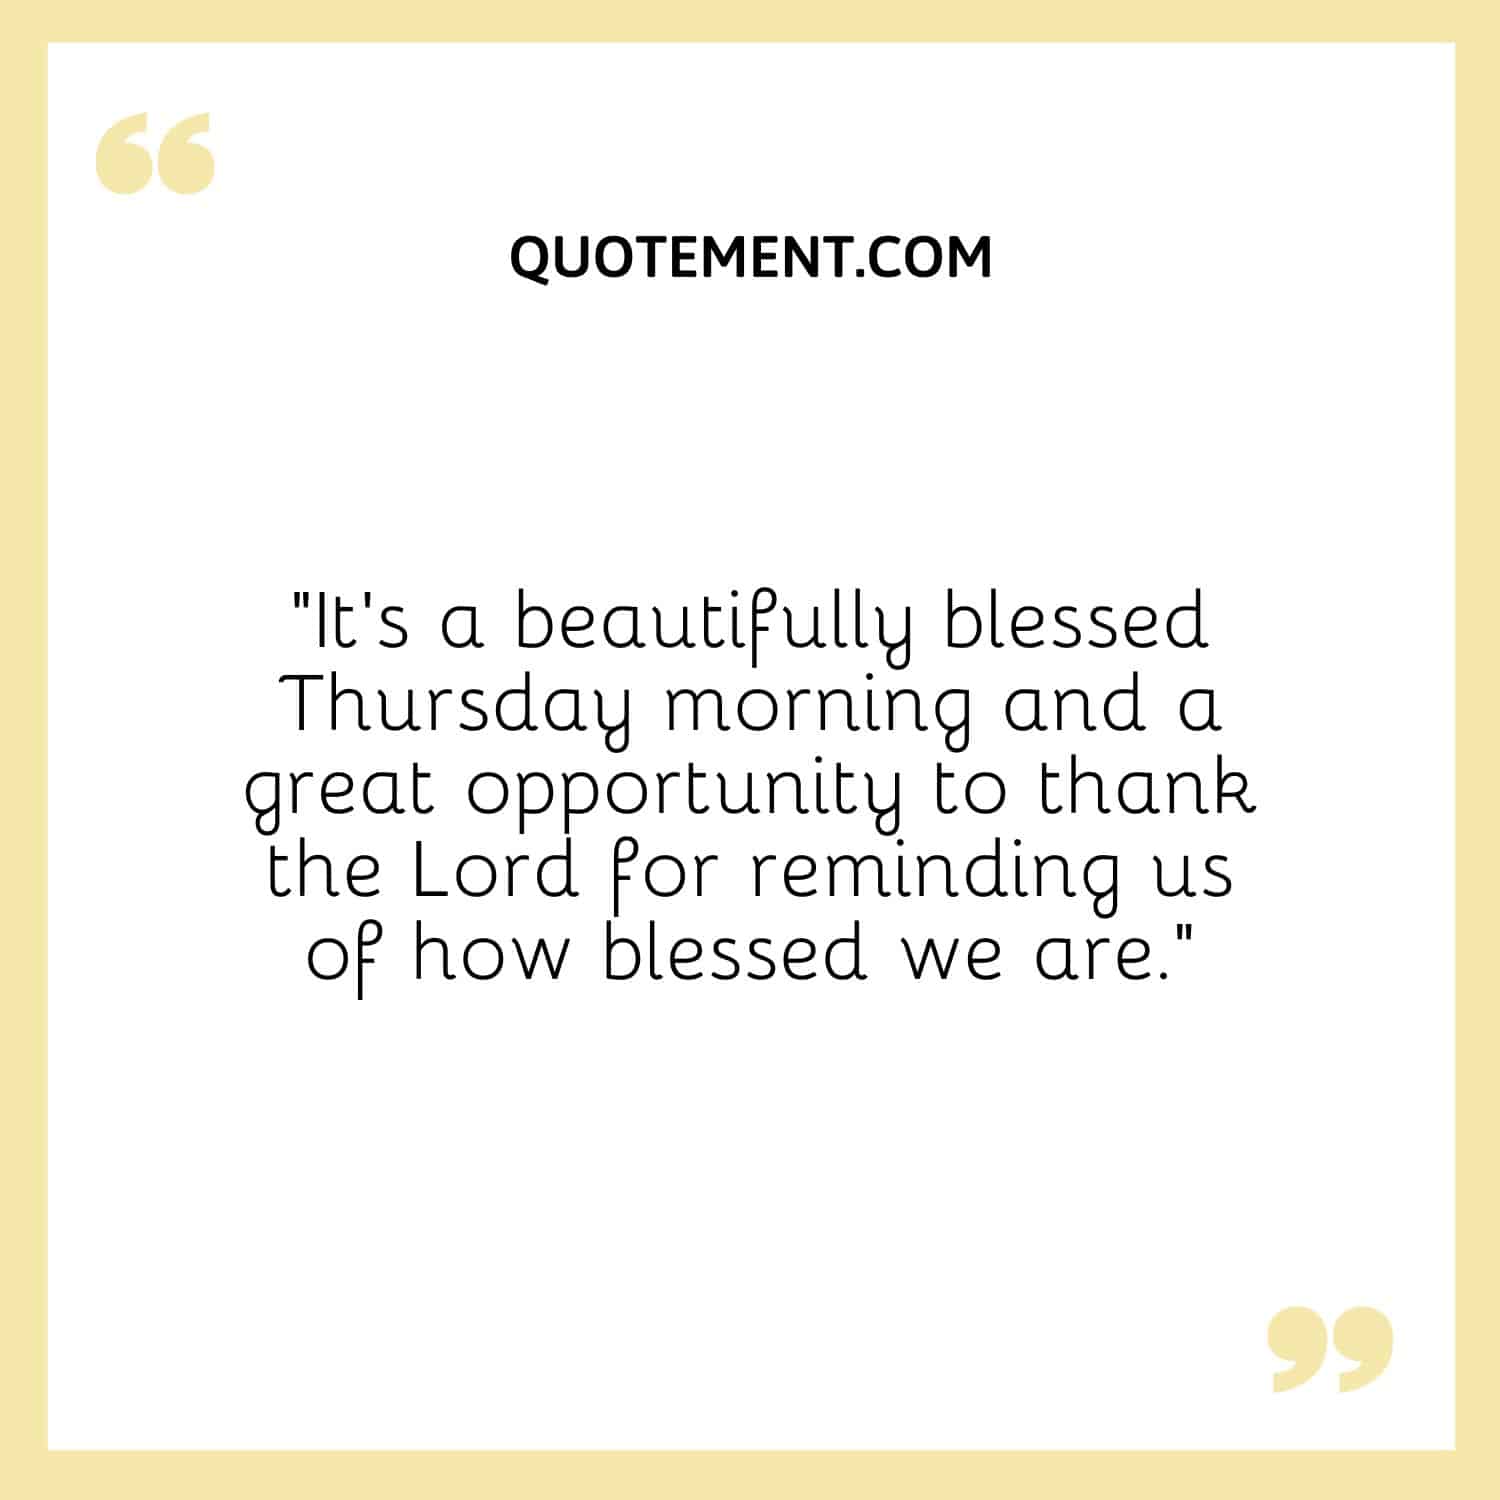 “It’s a beautifully blessed Thursday morning and a great opportunity to thank the Lord for reminding us of how blessed we are.”